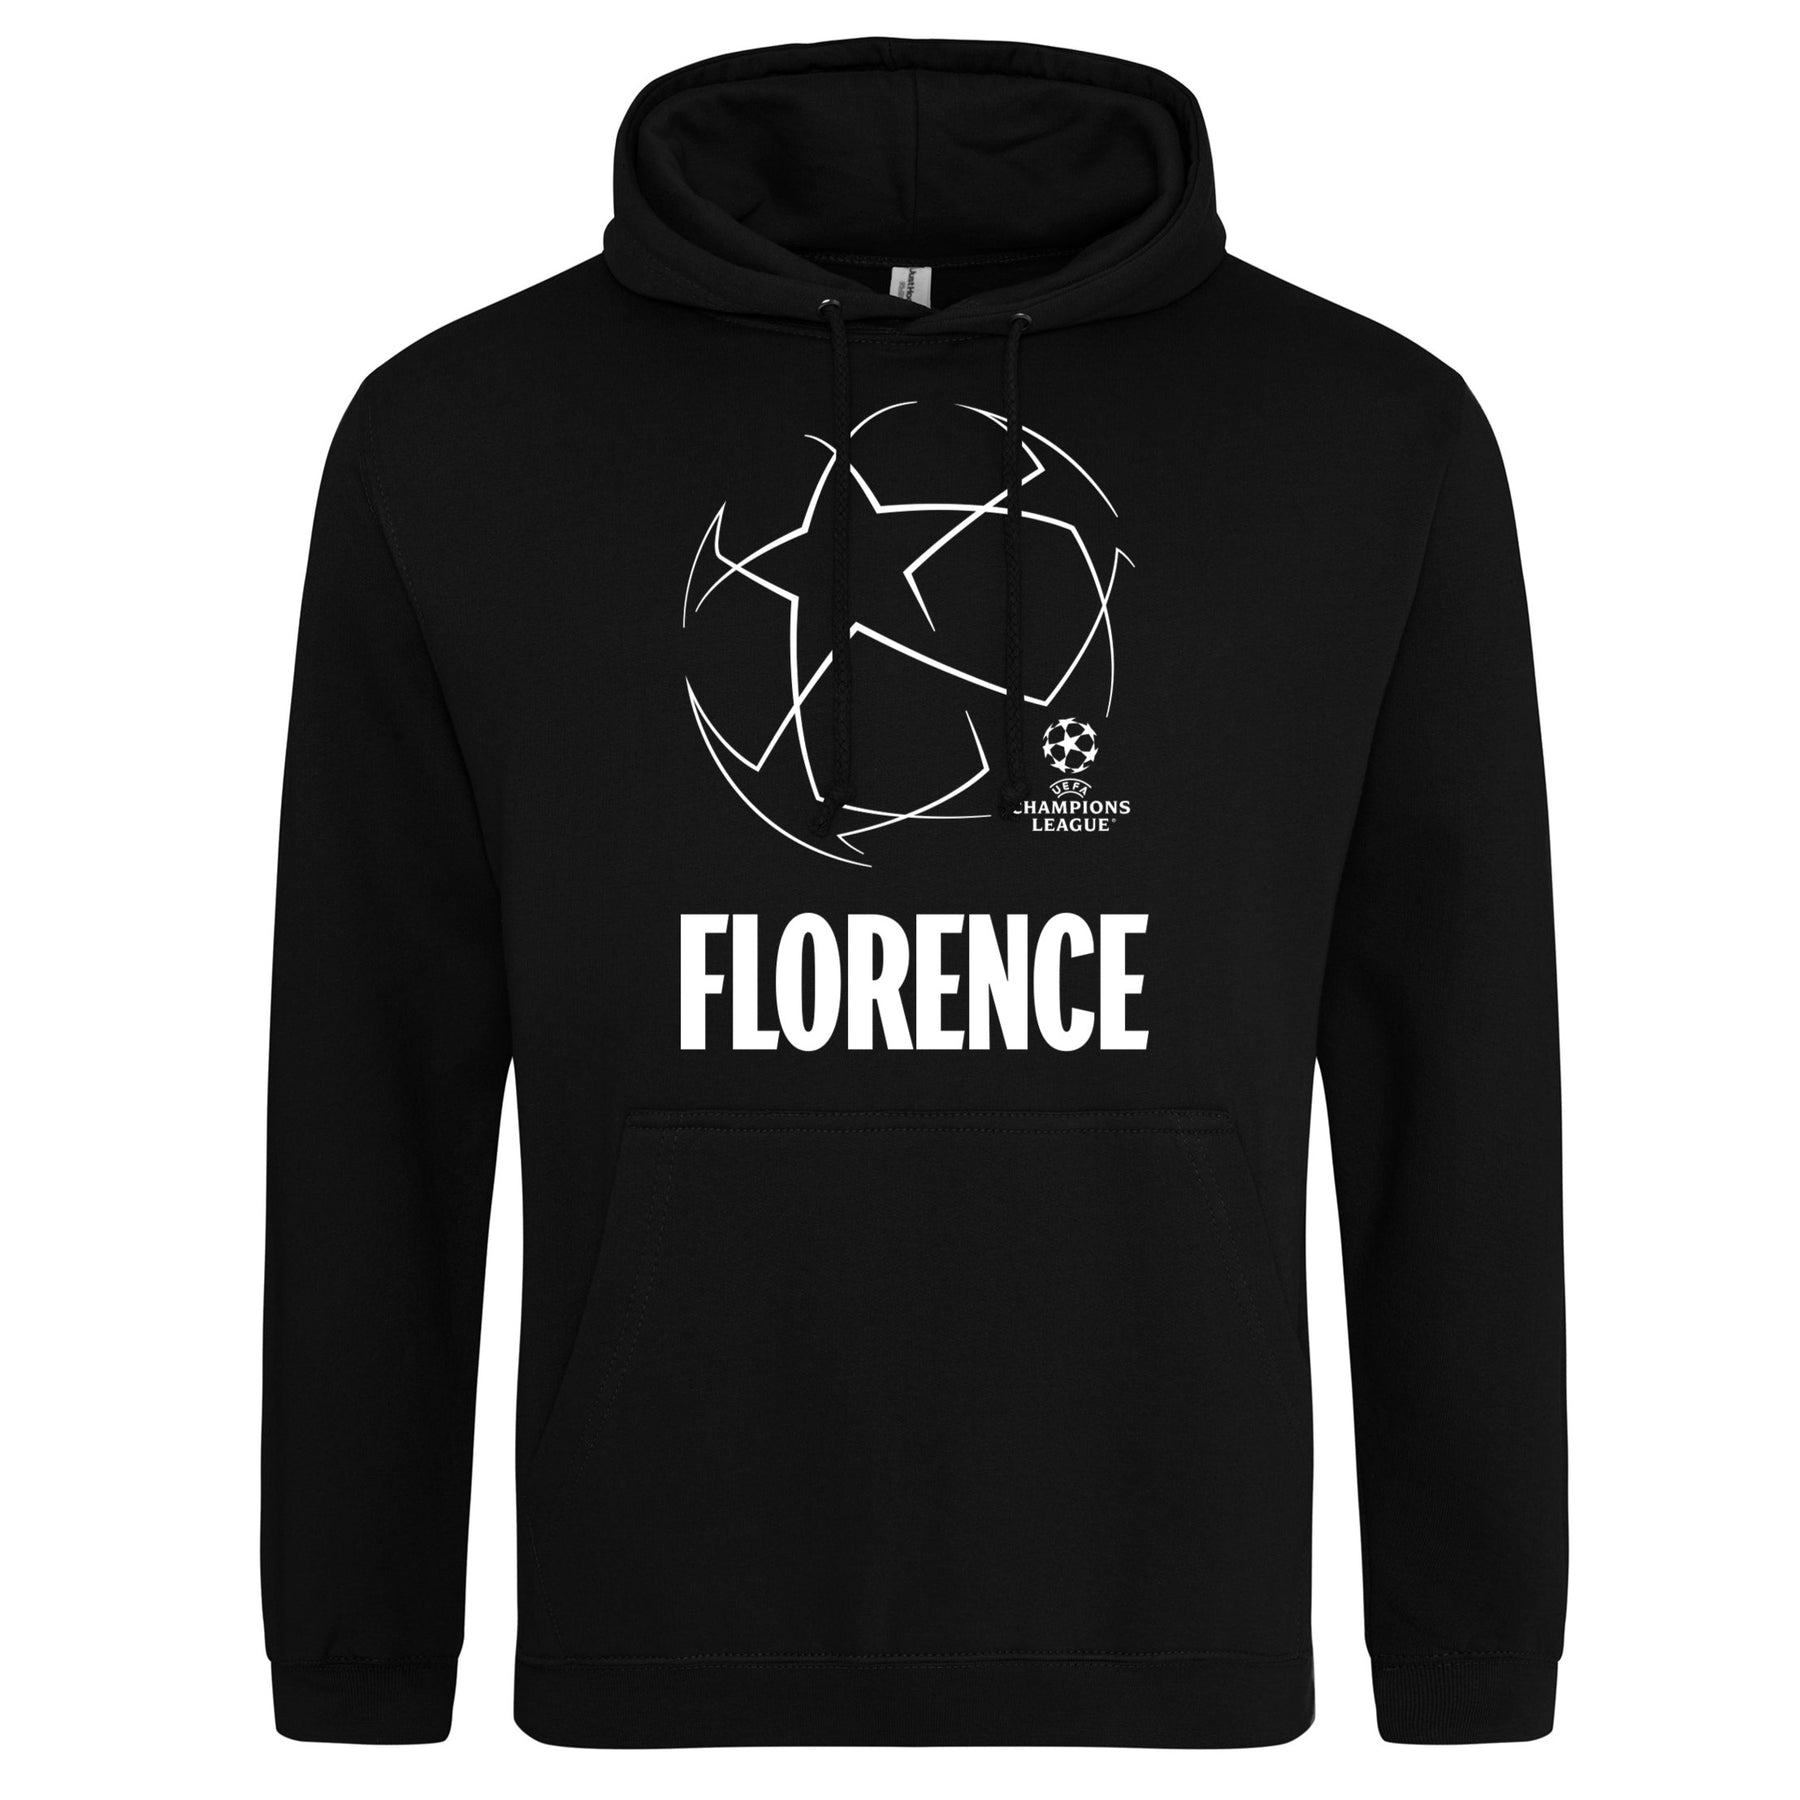 Champions League Starball Florence City Hoodie Black